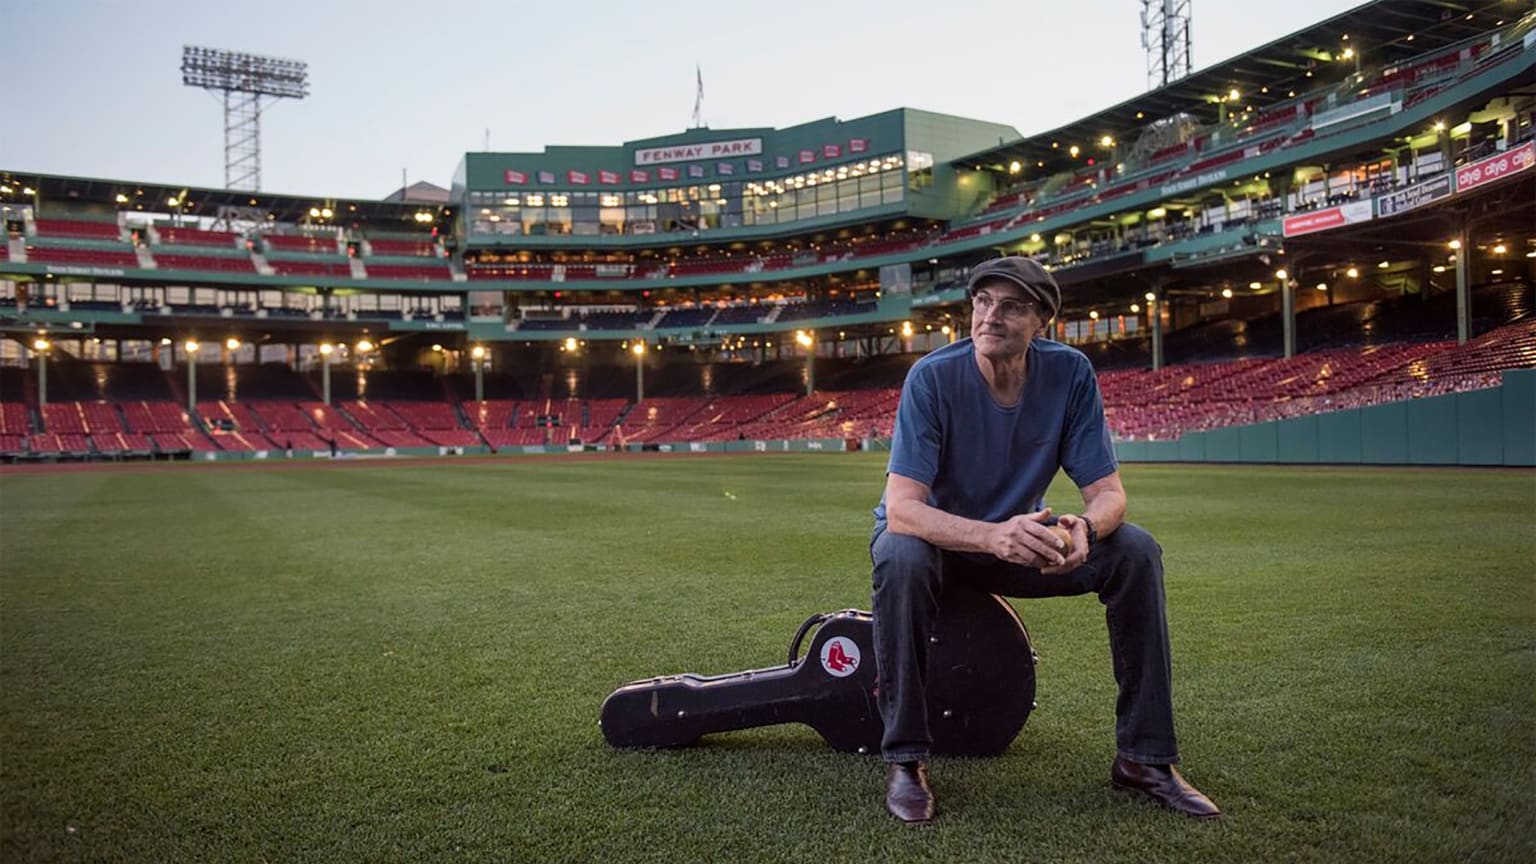 Seating Chart Fenway Park James Taylor